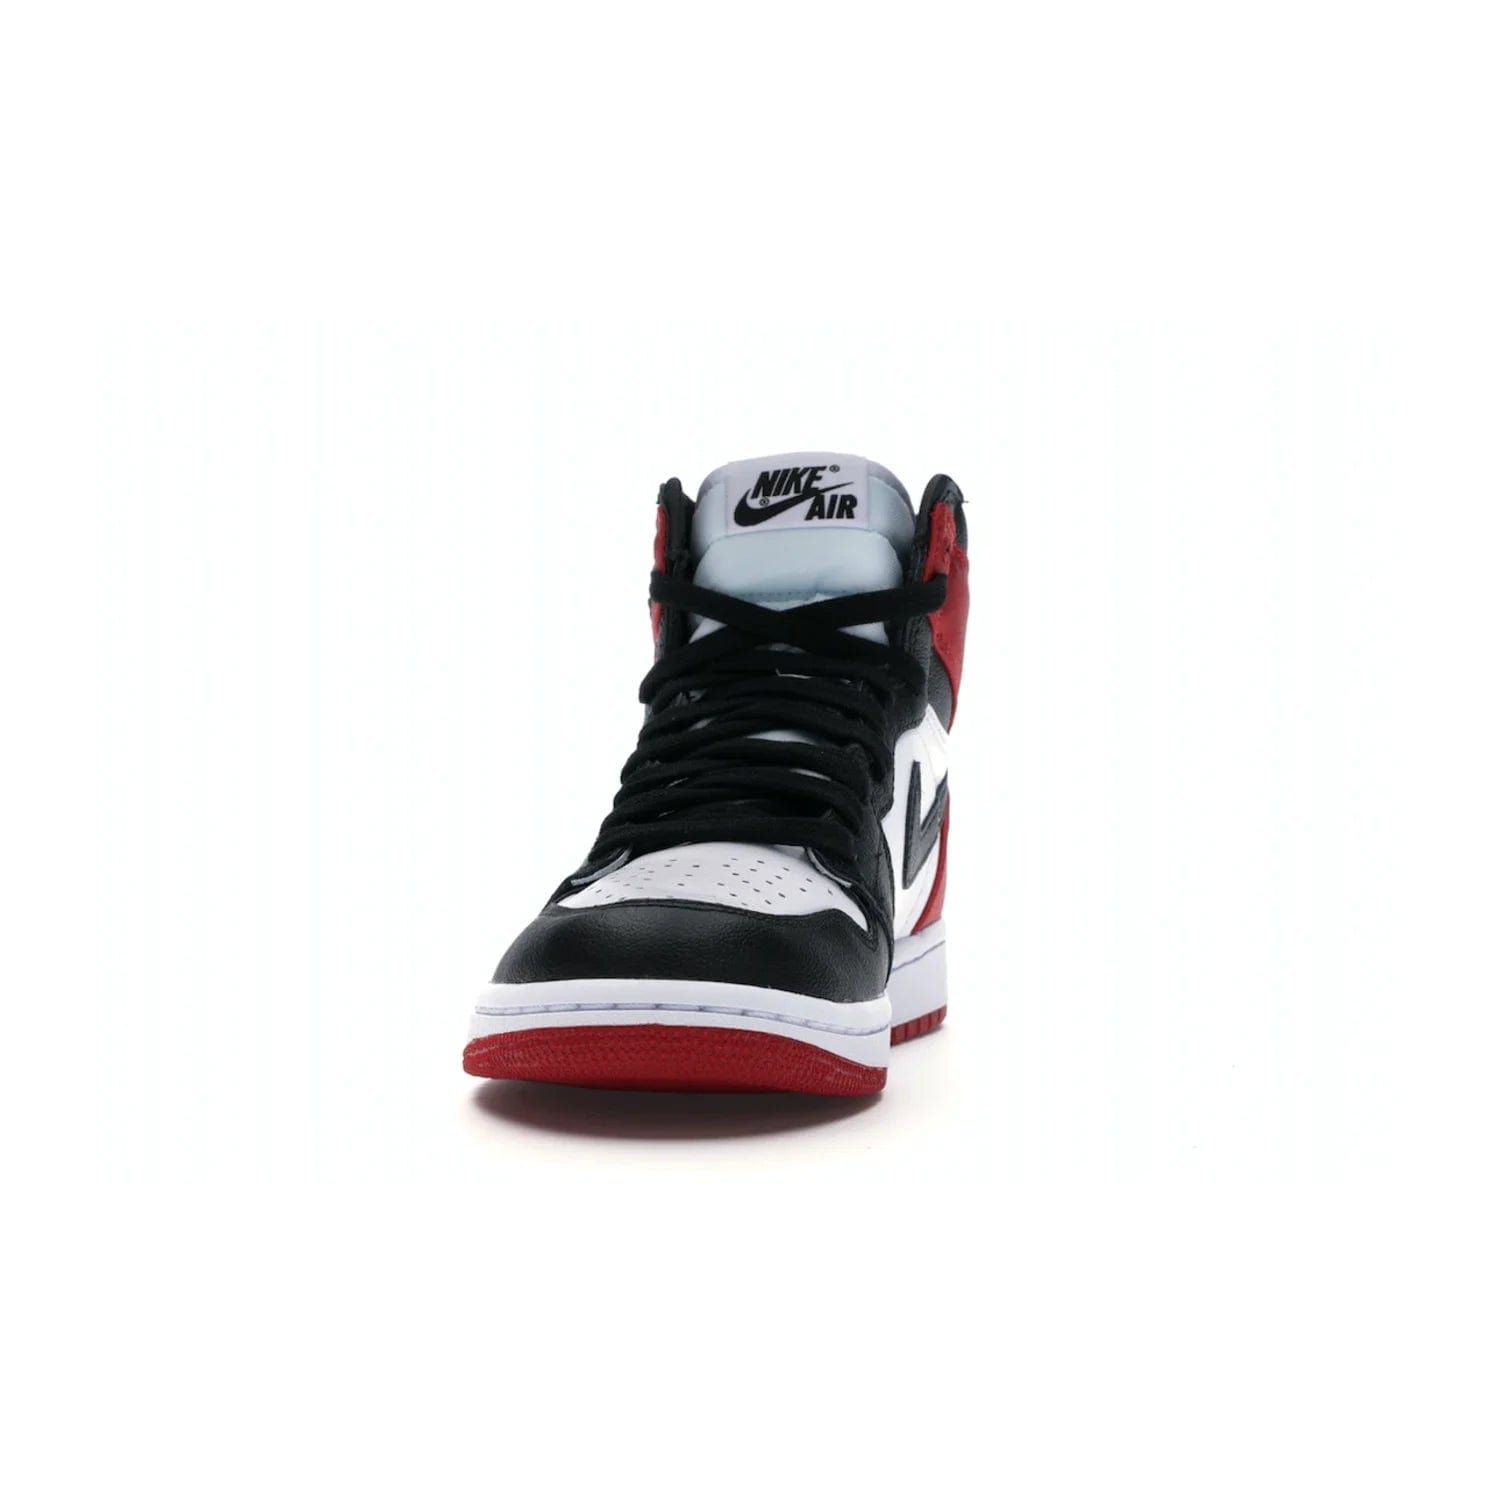 Jordan 1 Retro High Satin Black Toe (Women's) - Image 11 - Only at www.BallersClubKickz.com - Luxurious take on the timeless Air Jordan 1. Features a mix of black leather and satin materials with subtle University Red accents. Elevated look with metal Wings logo on the heel. Released in August 2019.